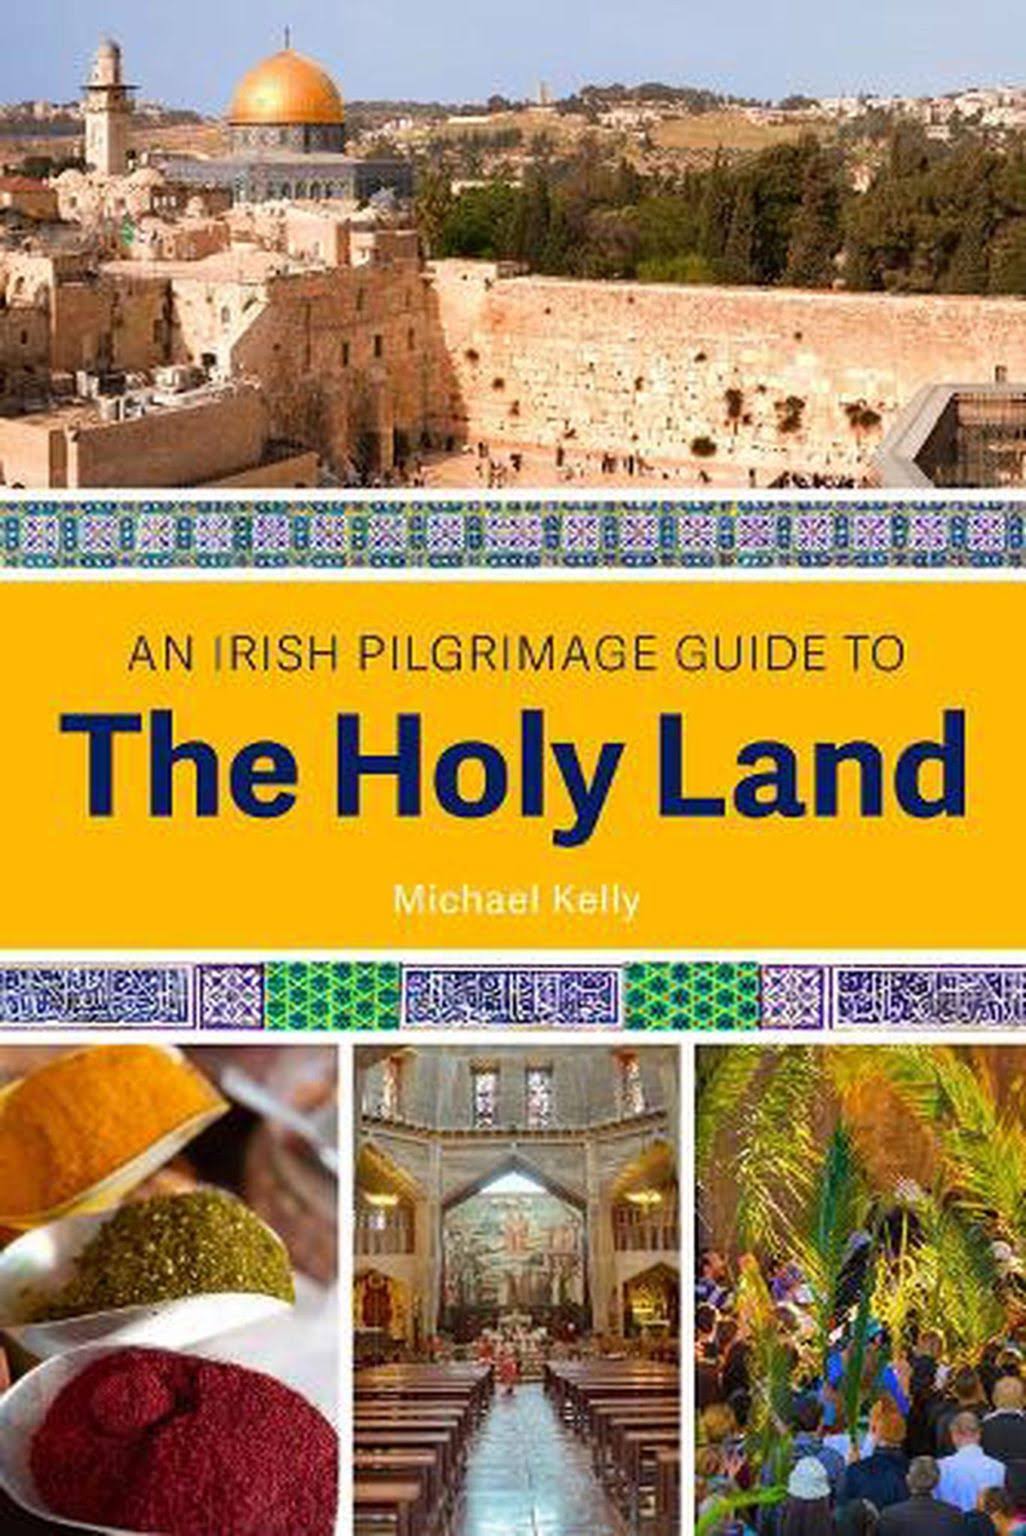 An Irish Guide to The Holy Land by Michael Kelly